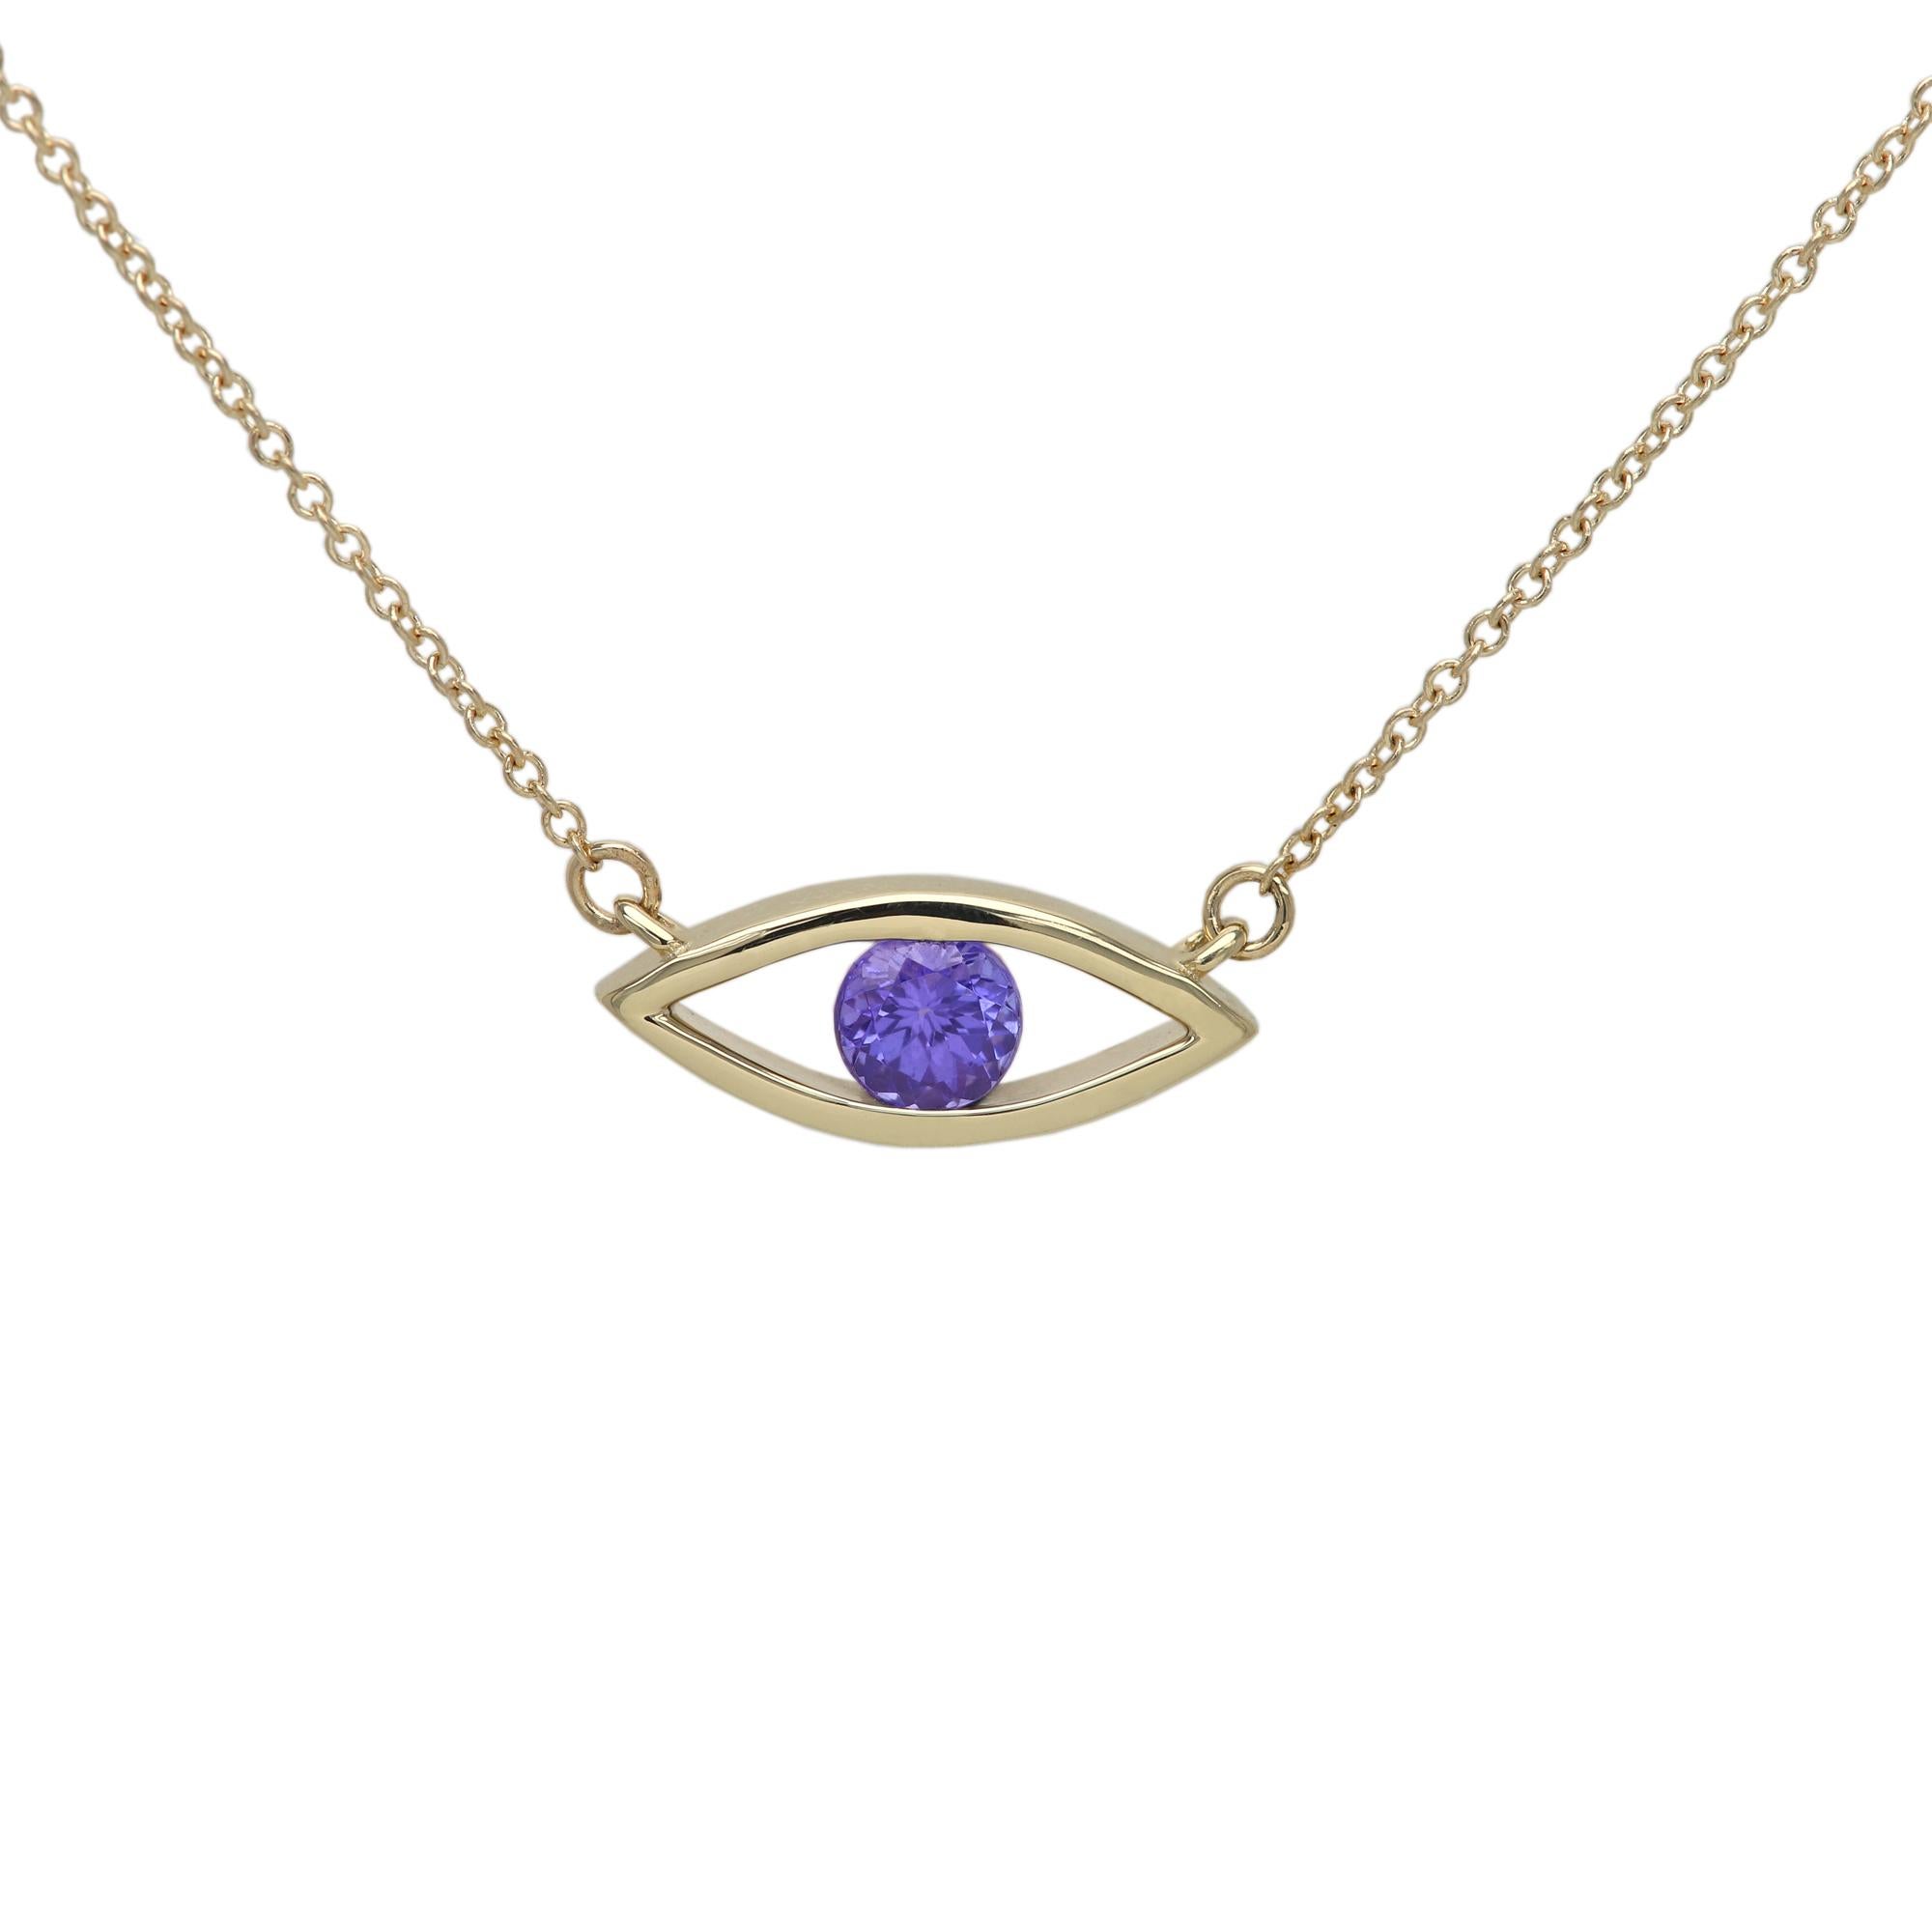 New, Very Elegant & Lovely, Evil Eye Birthstone Necklace Solid 14k Yellow Gold with Natural Purple Tanzanite gemstone 
Set in Yellow Gold Evil Eye - Good Luck & protection
Classic Cable Chain and Lobster Lock - all 14k, 
Chain Length total is 16.75'